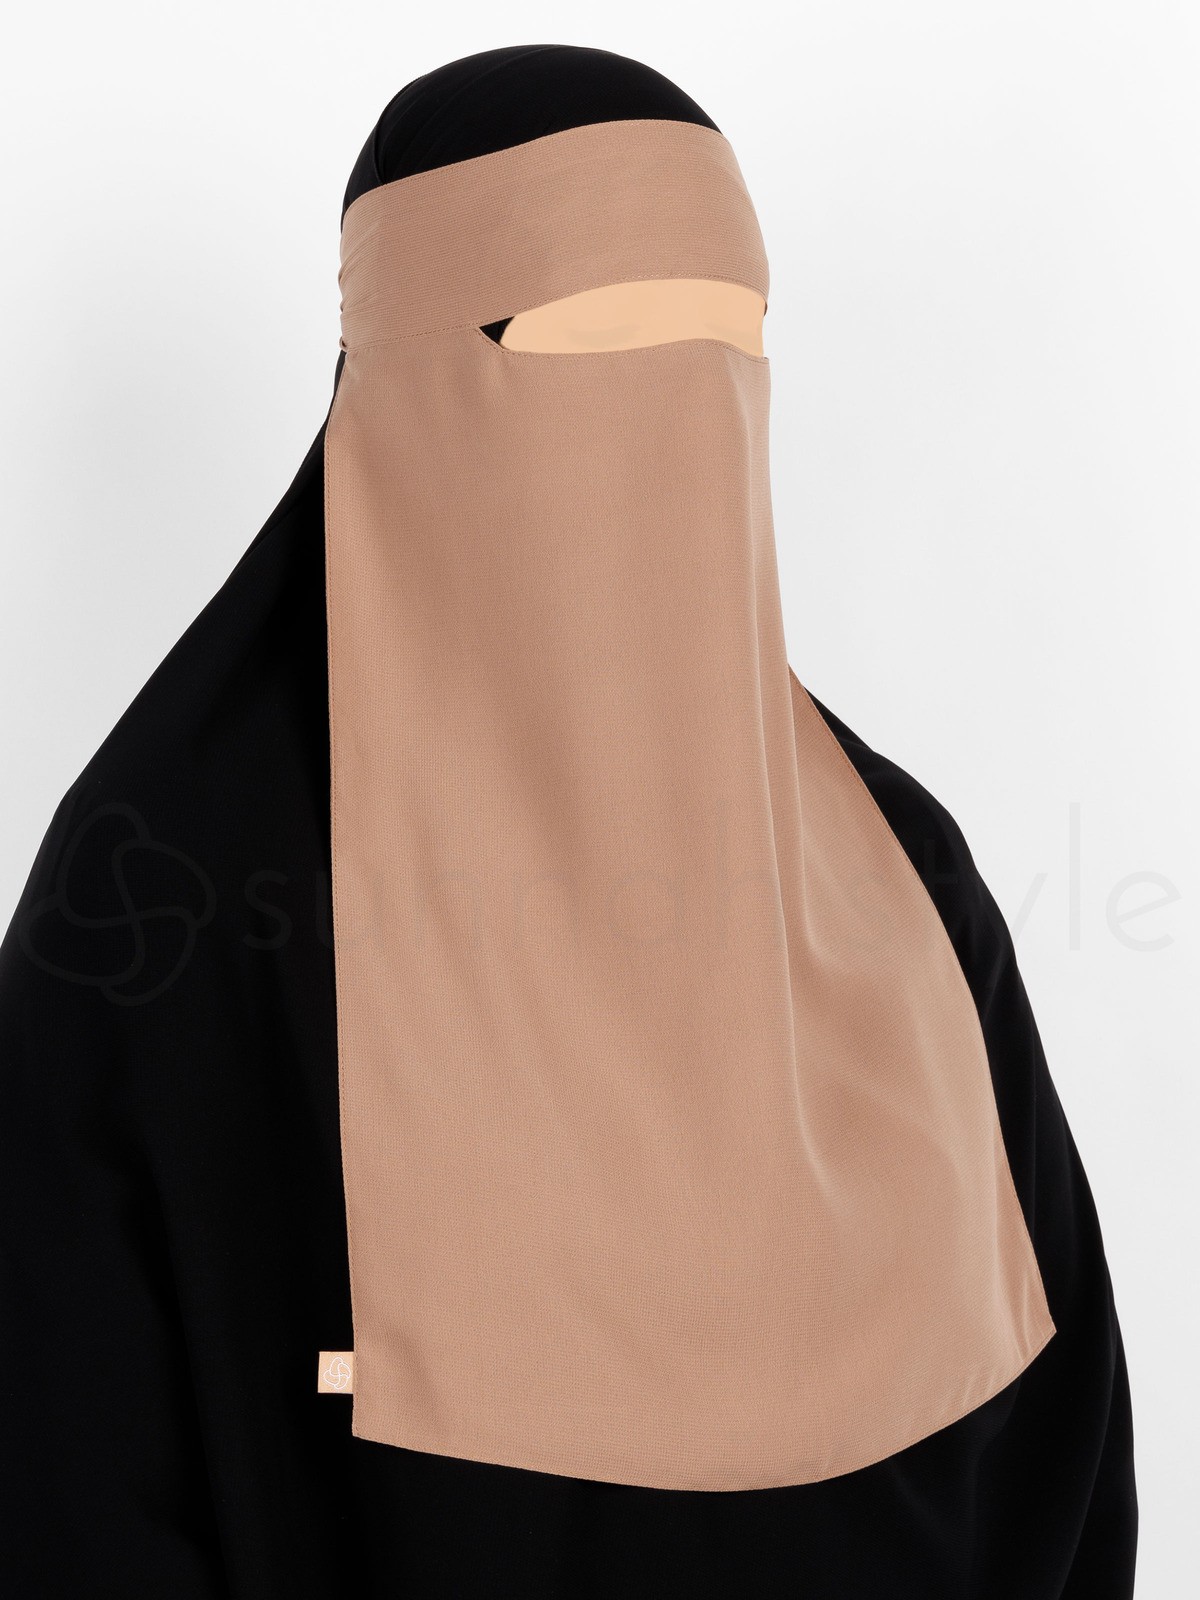 Sunnah Style - Narrow No-Pinch One Layer Niqab (Toffee)